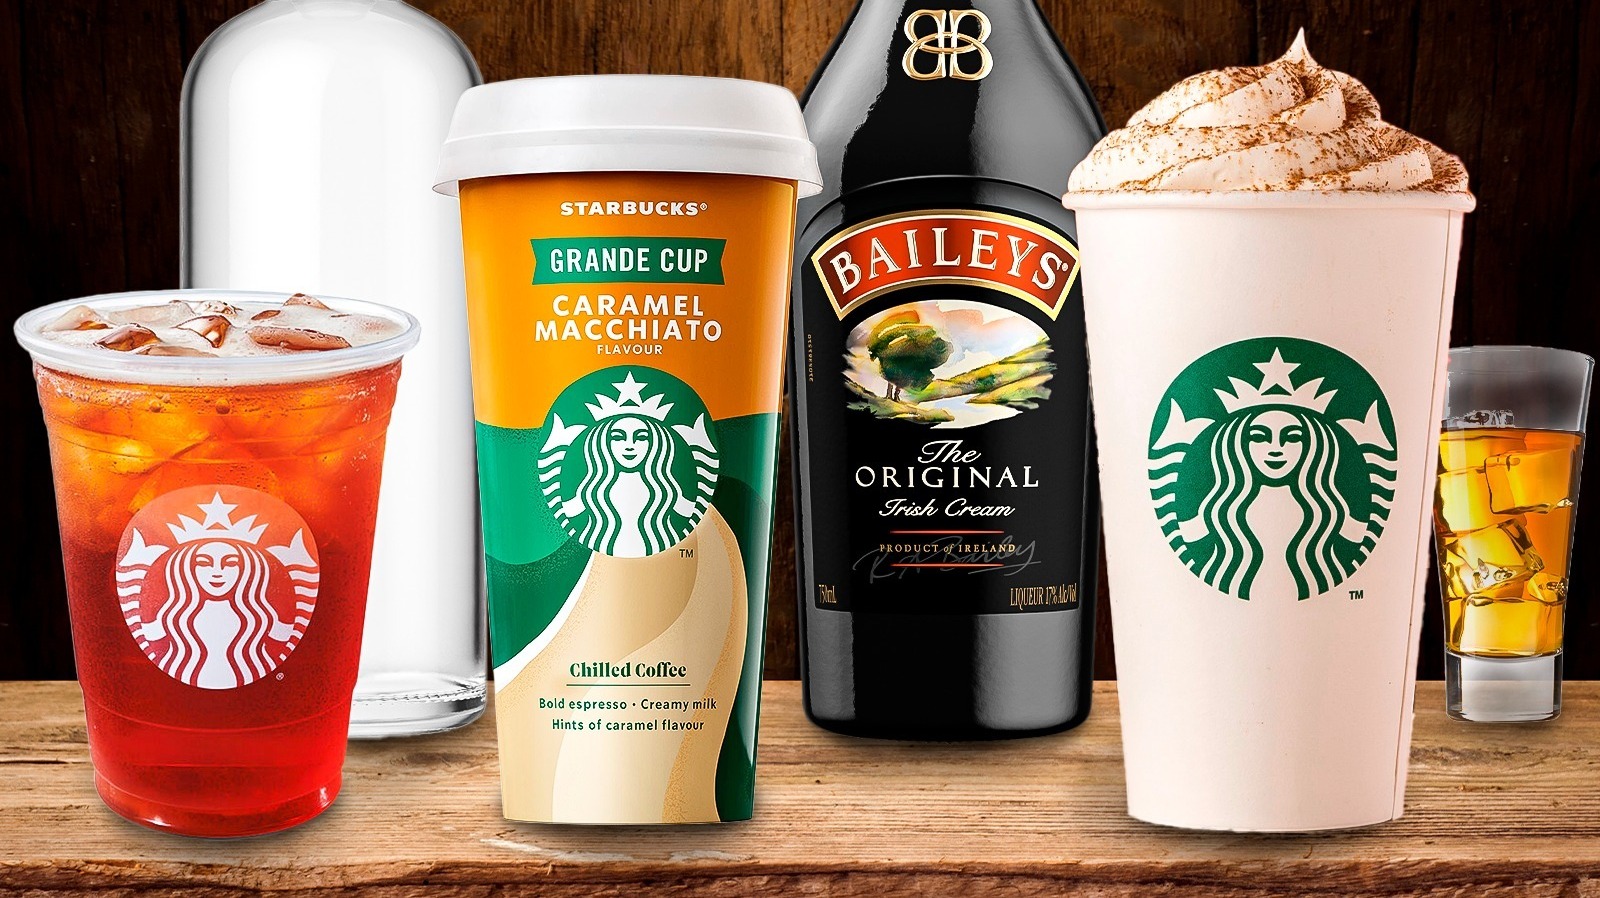 https://www.tastingtable.com/img/gallery/9-liquor-pairings-to-turn-your-starbucks-drink-into-a-cocktail/l-intro-1696258406.jpg